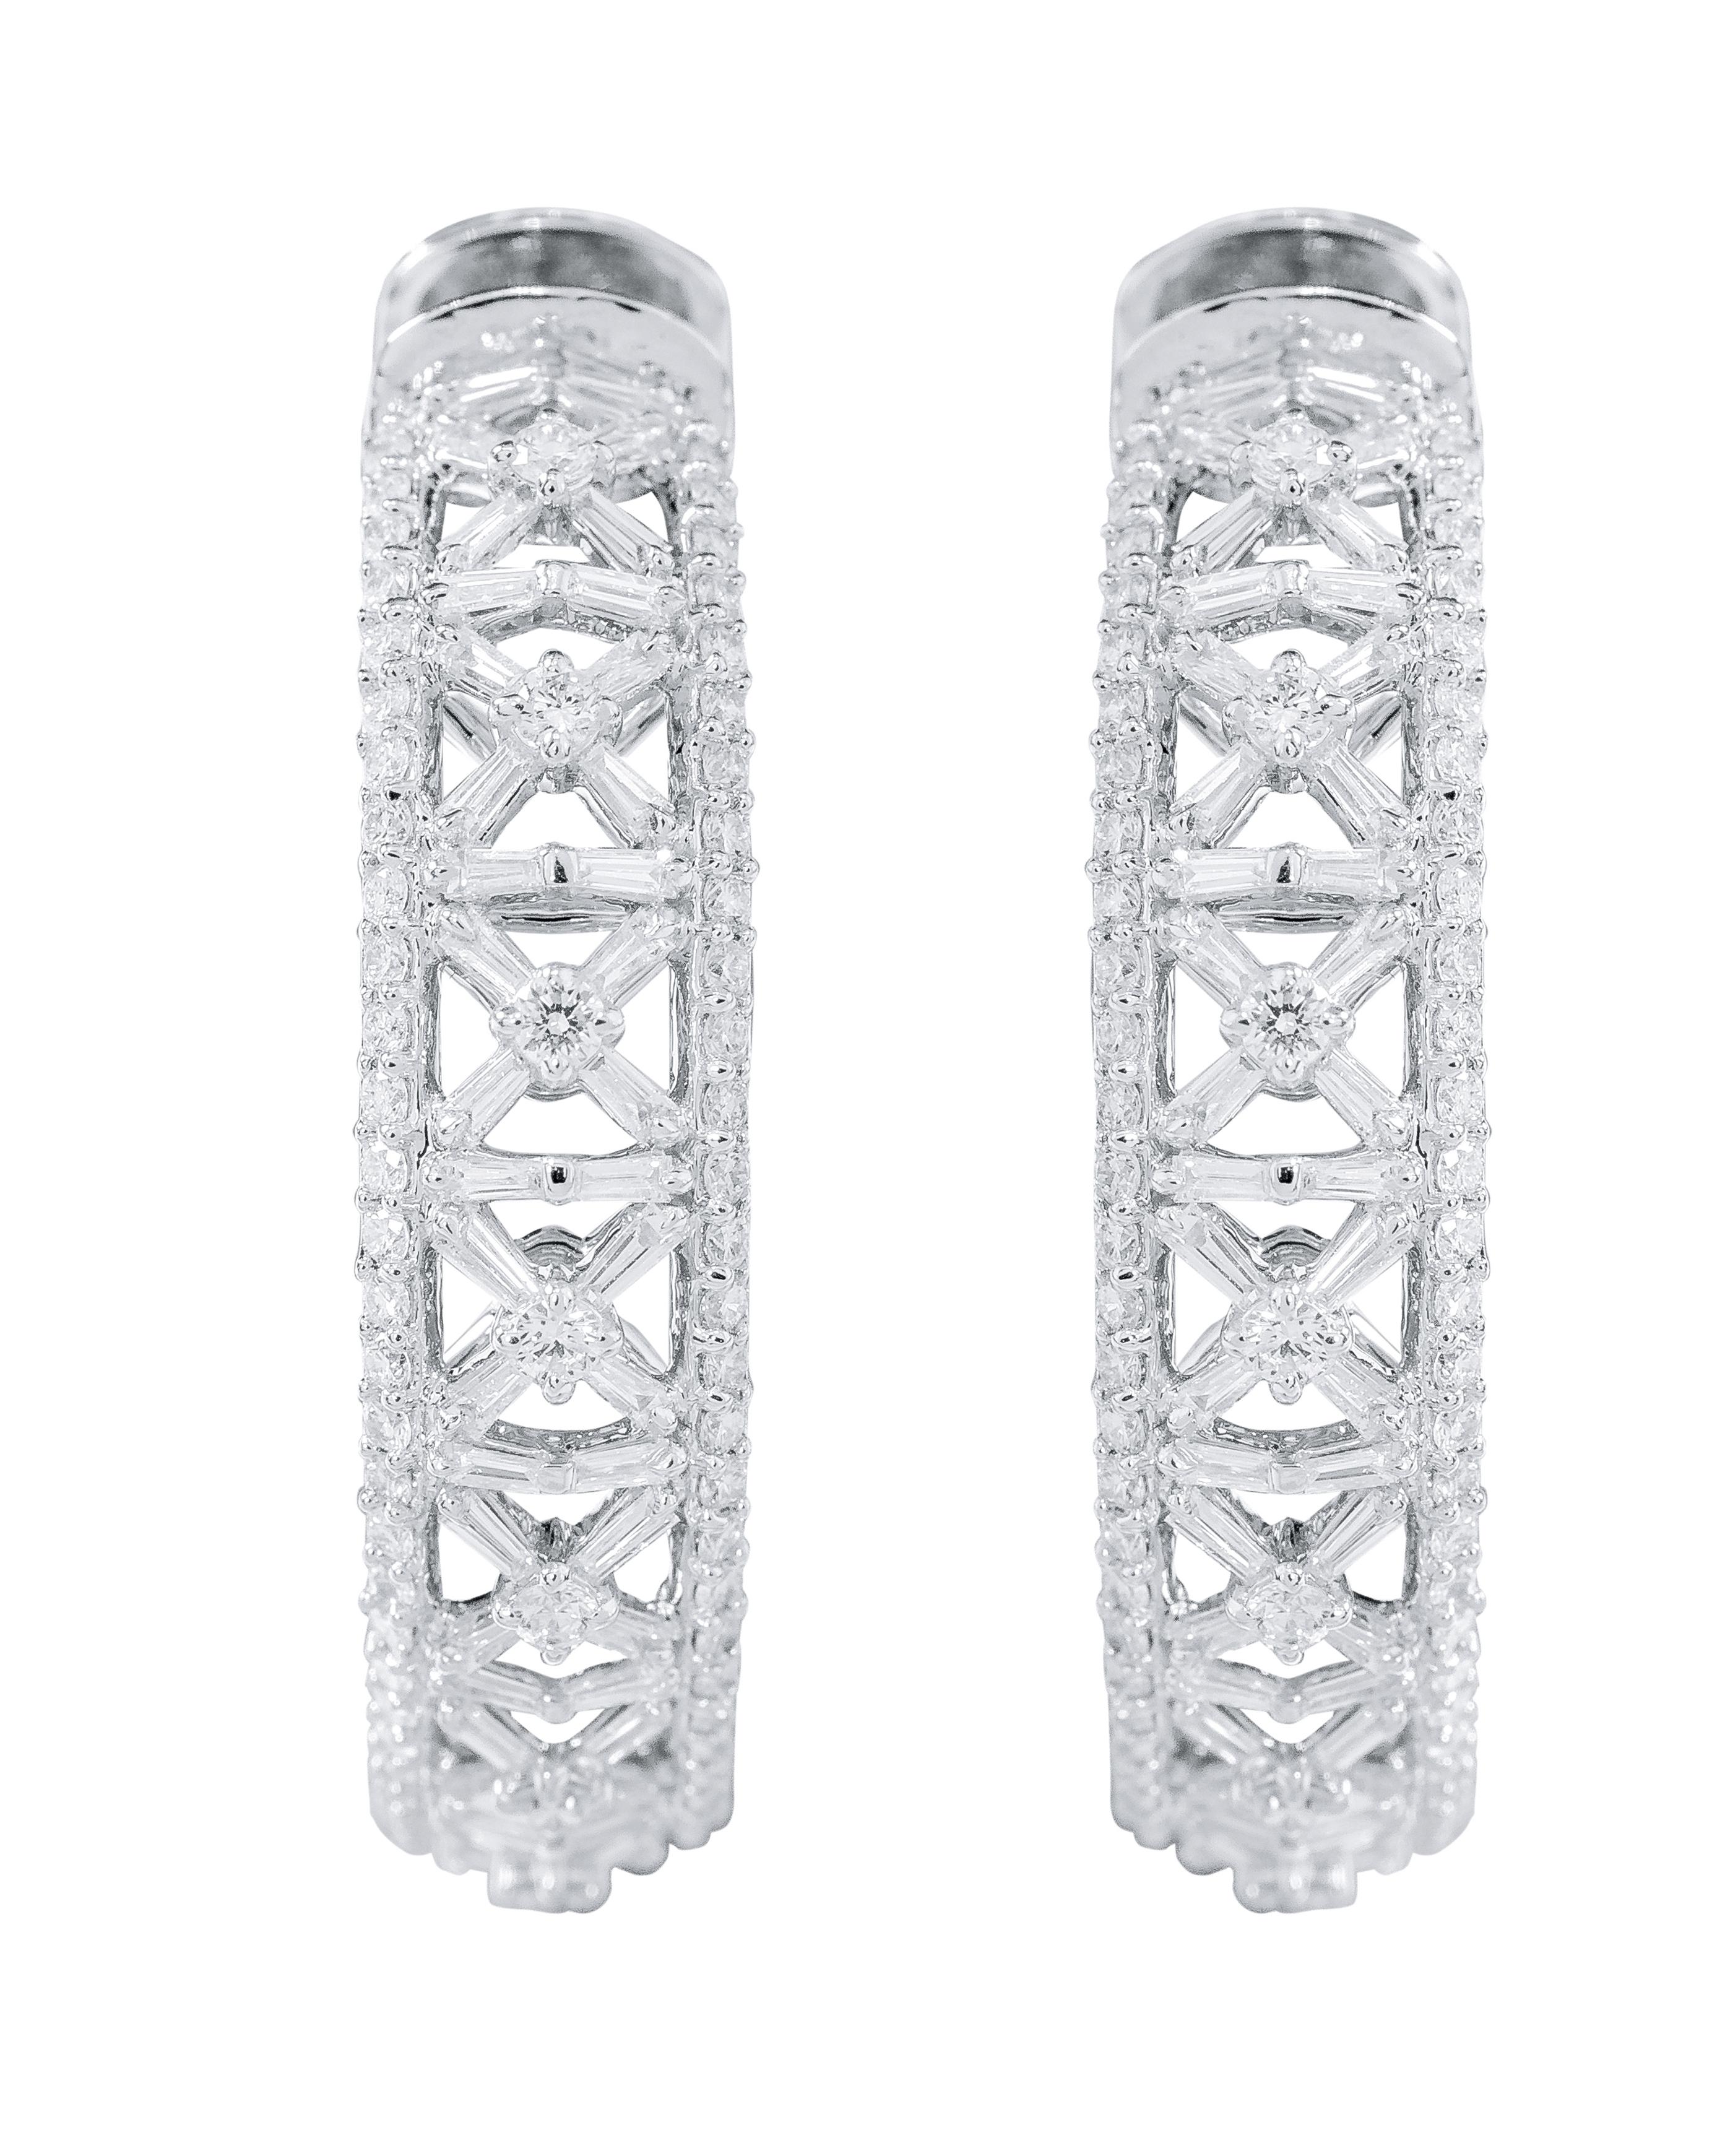 18 Karat White Gold 4.70 Carat Diamond Hoop Earrings

This adorable and glamorous criss-cross hoop earring with the combination of baguette-cut and brilliant-cut diamonds is a splendid design idea. The angled baguette identically sized diamonds